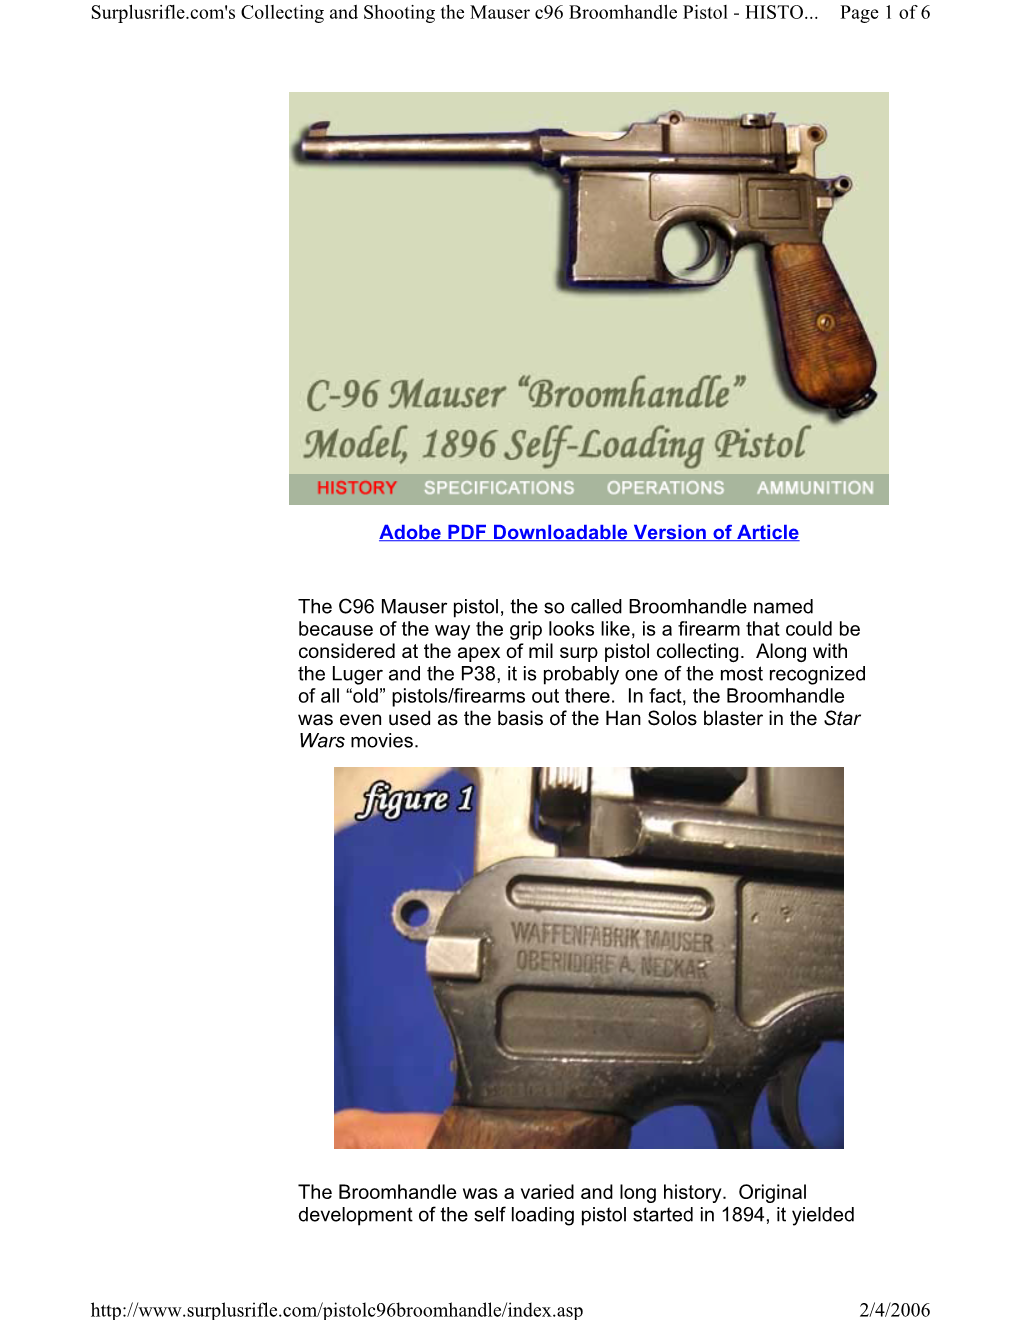 Adobe PDF Downloadable Version of Article the C96 Mauser Pistol, The